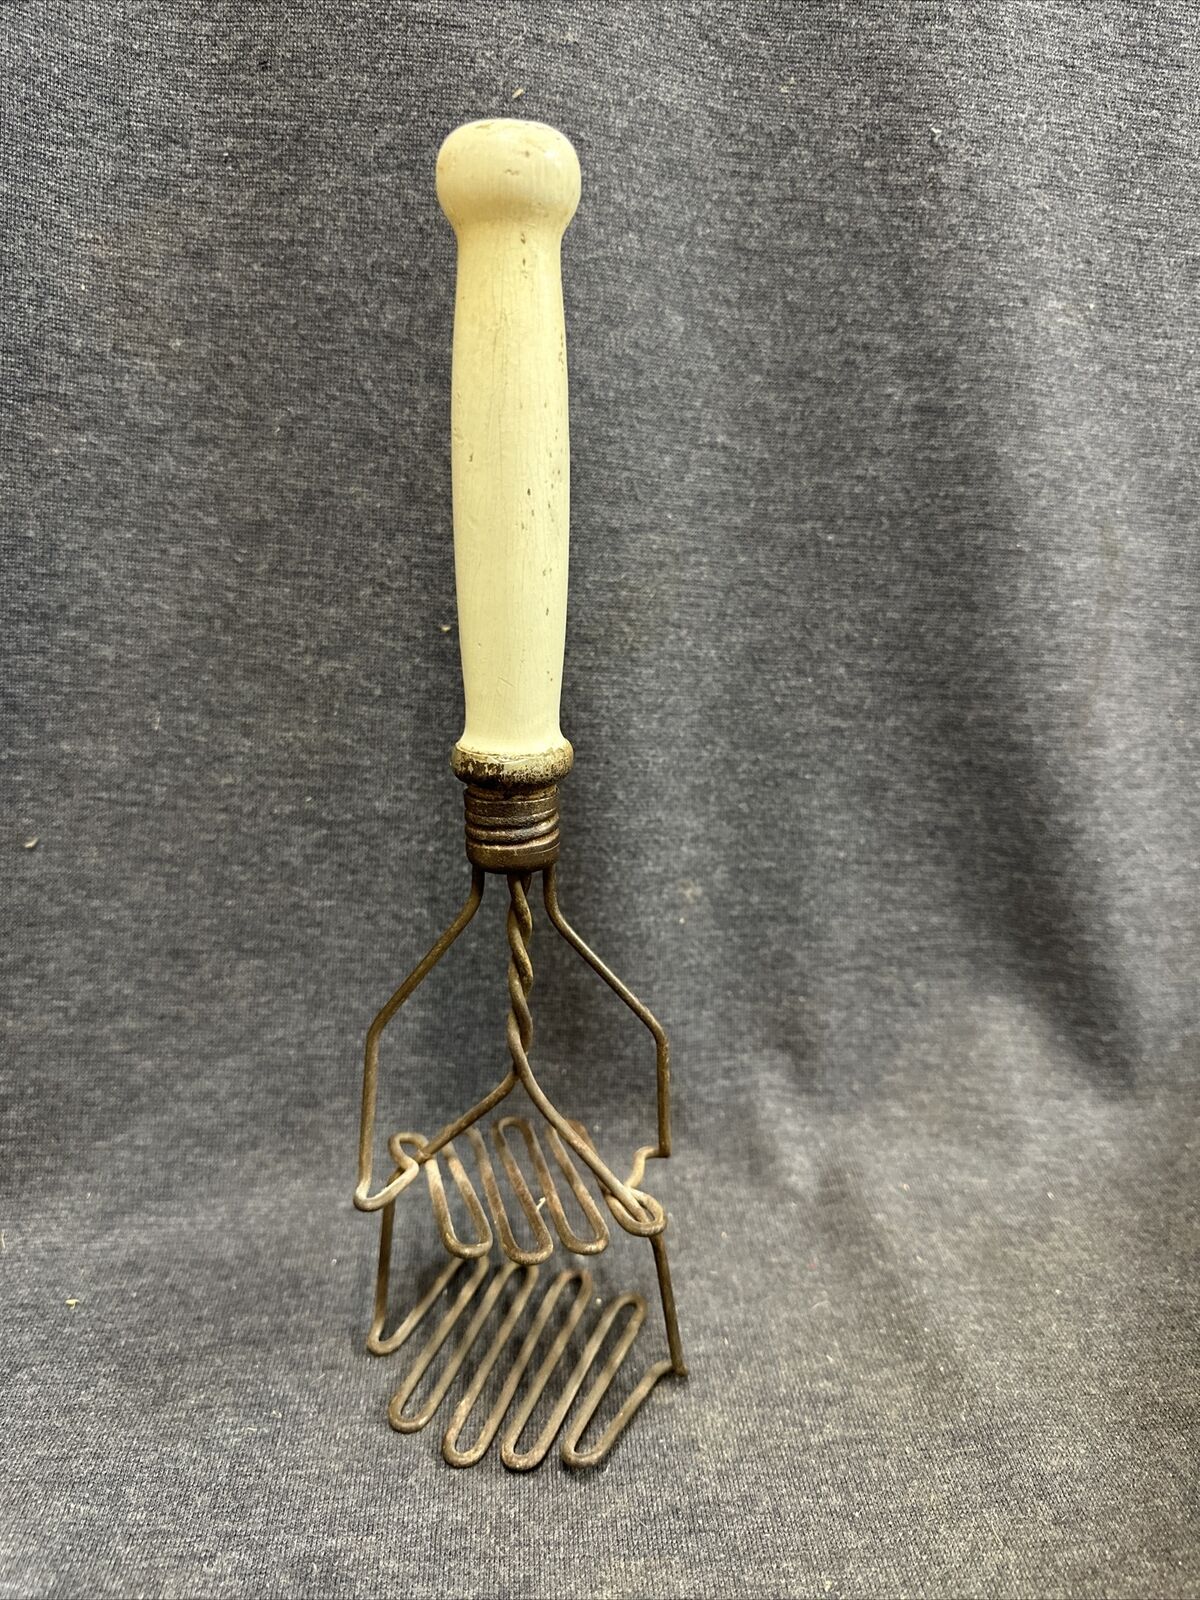 Unusual Vintage Spring Loaded Twisted Wire Potato Masher